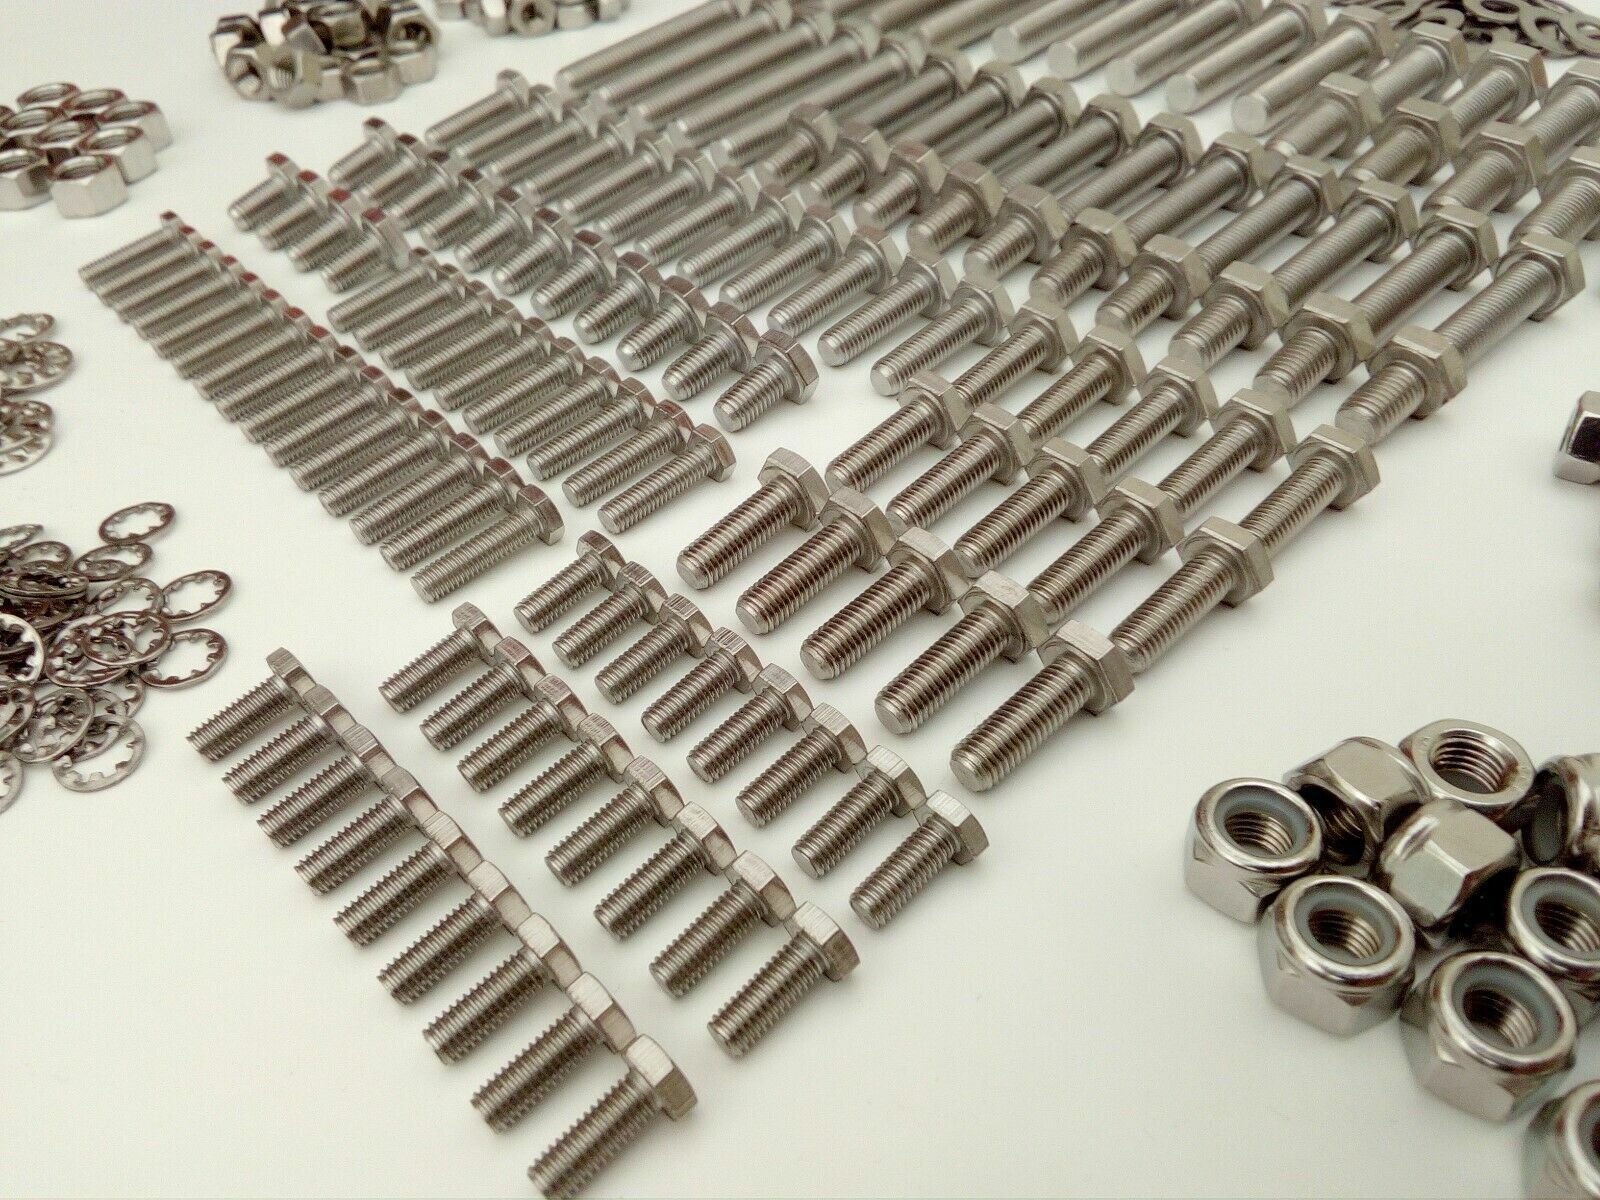 1500pc Stainless UNC Hex Bolts, Nuts & Washer GPW WILLYS JEEP RESTORATION Pack Populaire acties